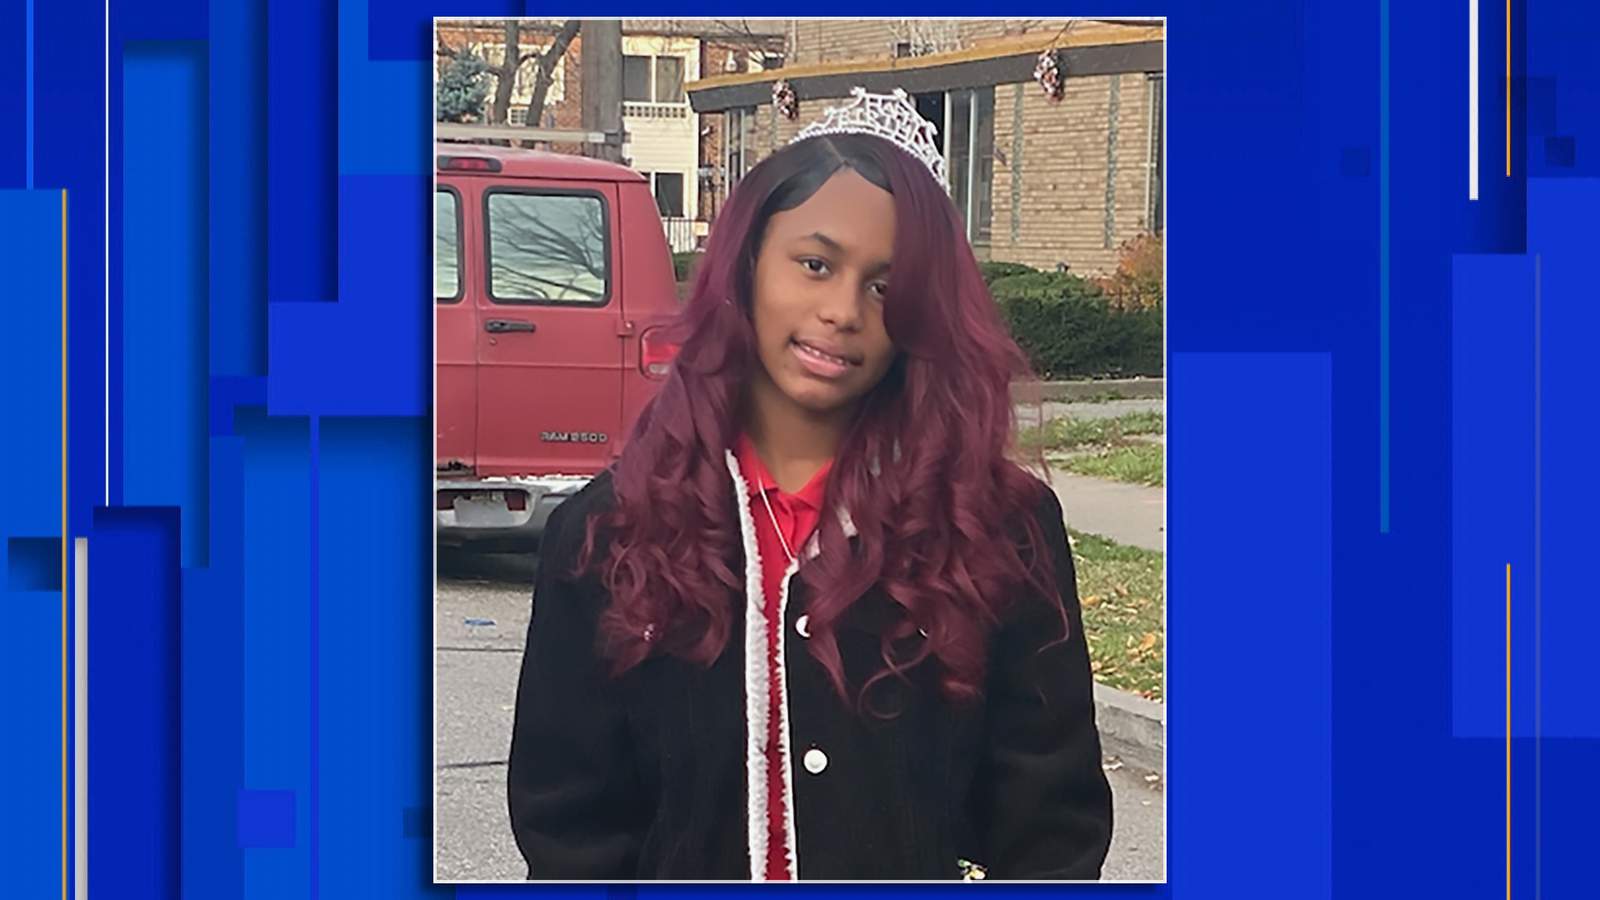 14-year-old girl who went missing found safe, Detroit police say